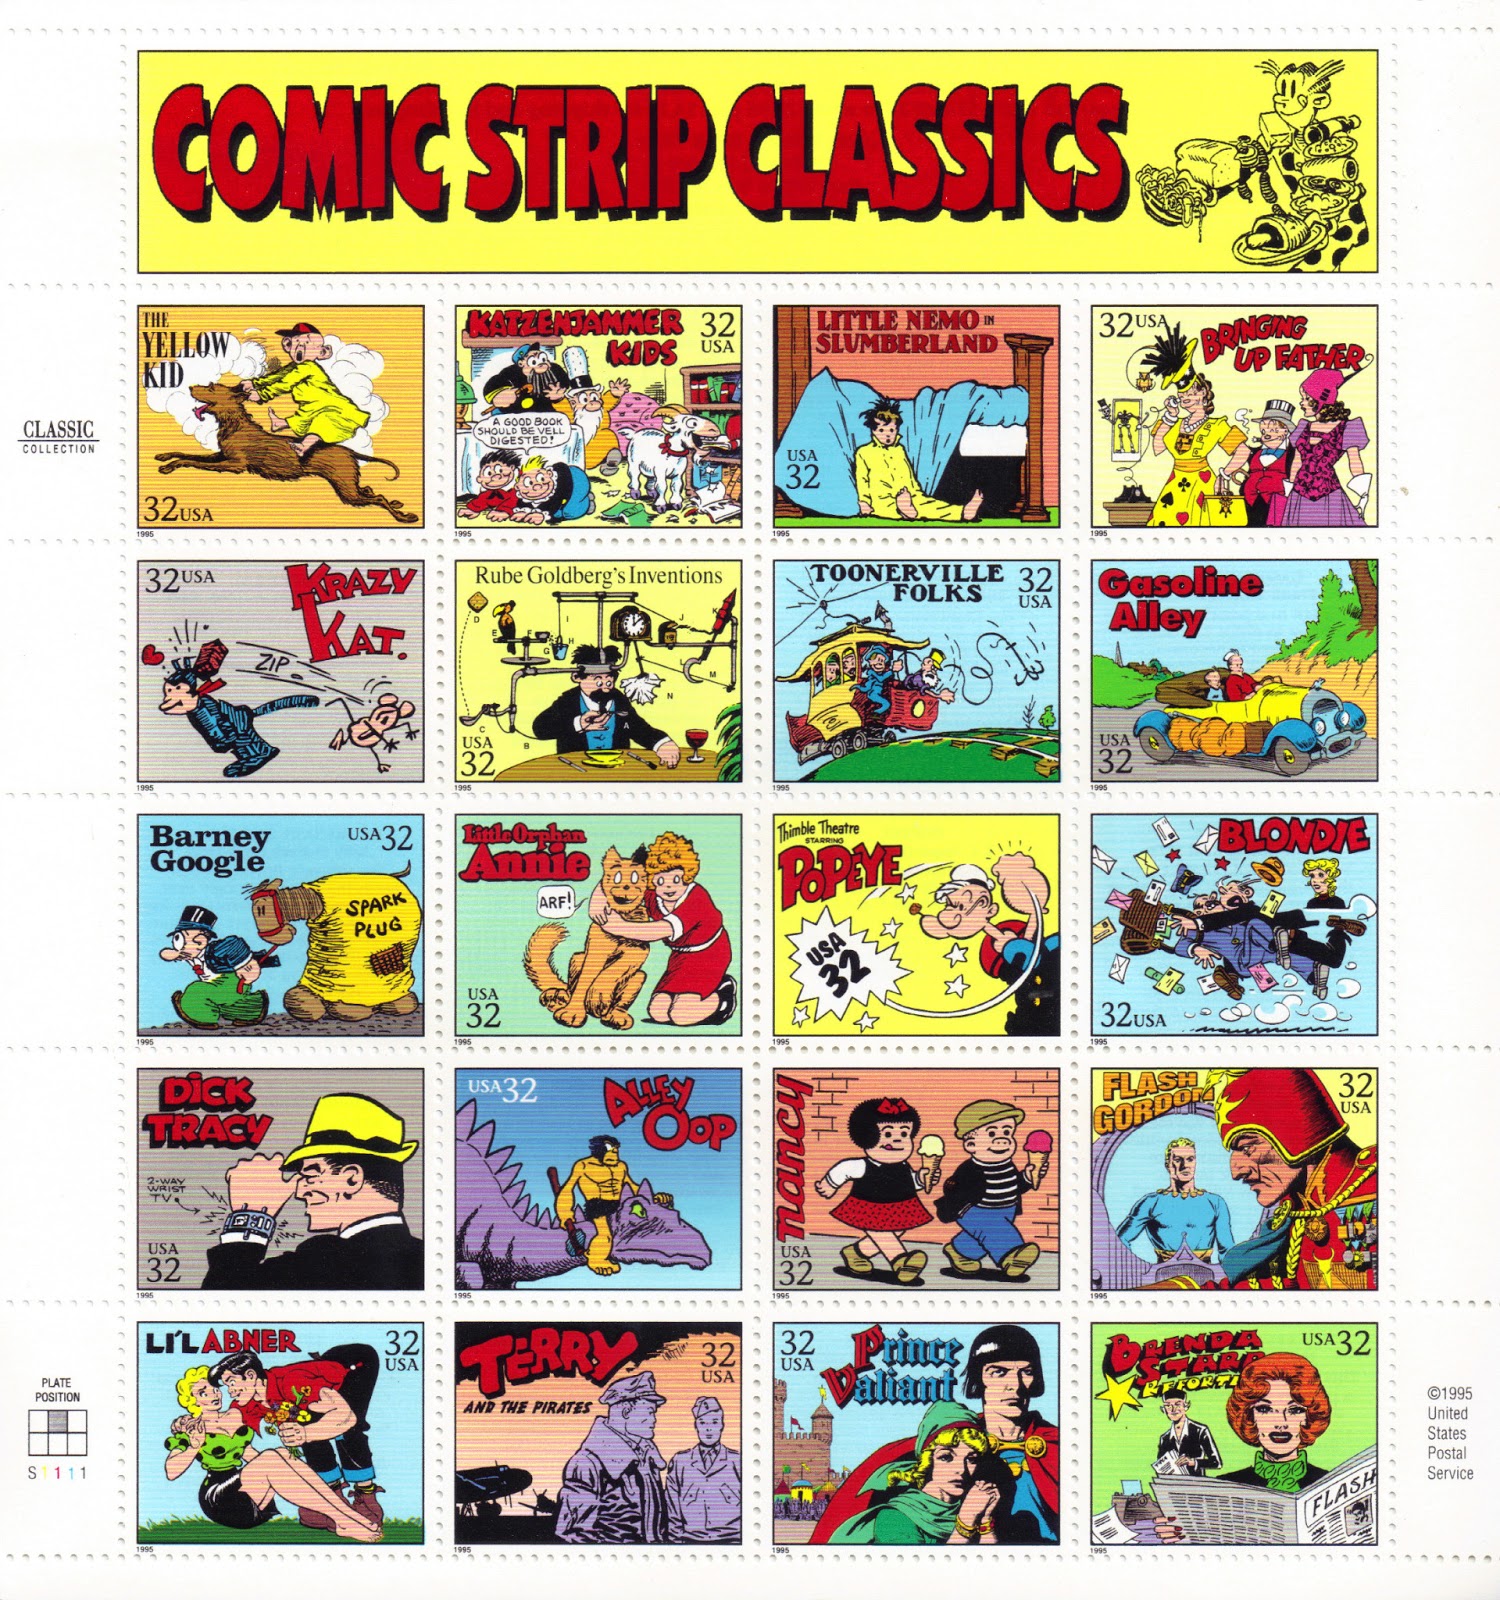 Comic Strip Classics, U.S. Postal Service sheet of stamps,
	featuring Dagwood Bumstead with makings for a Dagwood sandwich balanced precariously on his extended arms,
	heading a block of stamps representing the main characters of 20 comic strips:
	The Yellow Kid (a young boy in a yellow nightgown rides a brown dog, holding onto the dog's ears),
	Katzenjammer Kids (a white goat chews books from a shelf, the Captain and the Inspector run into the room, and the two boys, Hans and Fritz, kneel and say 'A good book should be well digested'),
	Little Nemo in Slumberland (a young boy in a yellow nightgown is fallen out of bed and onto the floor with his hair dishevelled and his legs out),
	Bringing Up Father (Jiggs, a short man in top hat, tails, and cigar sticking out the side of his mouth, takes the arms of two much taller women, his wife, Maggie, and their daughter, Nora),
	Krazy Kat (Ignatz the mouse throws a brick at Krazy Kat, a black cat with a pink face),
	Rube Goldberg’s Inventions (a man sits at a table eating soup with an elaborate mechanism strapped to his head to cause a napkin to wipe his chin),
	Toonerville Folks (the Skipper, a white-bearded conductor on an electric trolly, throws out an anchor to help pull the trolly up Homan’s Hill),
	Gasoline Alley (Walt drives with young Skeezix on a country road in an old two-seat convertable car, bags packed on the running board),
	Barney Google (Barney leads his horse, Spark Plug, covered in a ragged yellow blanket),
	Little Orphan Annie (Annie in a red dress and on her knees huggs her orange dog, Sandy),
	Thimble Theater staring Popeye (Popeye swings his fist and 'USA 32' is displayed in the impact),
	Blondie (Blondie watches Dagwood as he collides into Mr. Beasley, the mailman, mail flying into the air),
	Dick Tracy (Tracy, wearing a black suit and yellow hat, checks his two-way wrist TV),
	Alley Opp (Alley Oop rides on the neck of his purple pet dinosaur, Dinny, wearing a fur loincloth and holding a stone axe),
	Nancy (Nancy and her friend Sluggo walk on a sidewalk, each with an ice-cream cone),
	Flash Gordon (Gordon, with his yellow hair, in a blue shirt, is seen in the video screen of Ming the Merciless wearing a red military suit and helmet),
	Li'l Abner (Abner with a small bouque of flowers leans over with his arm around Daisy Mae, in a green blouse and short black skirt sitting on the grass),
	Terry and the Pirates (Terry in a jacket and hat of a military pilot with another soldier, the silhouette of a bomber in the background),
	Prince Valiant (the prince, his hair shaped like a black helmet and wearing a red cape, has his arm around his love, Aleta, dressed in green, a castle in the background),
	Brenda Starr, Reporter (Starr, with orange hair and a green scarf, is reading a newspaper, her fingernails painted red).